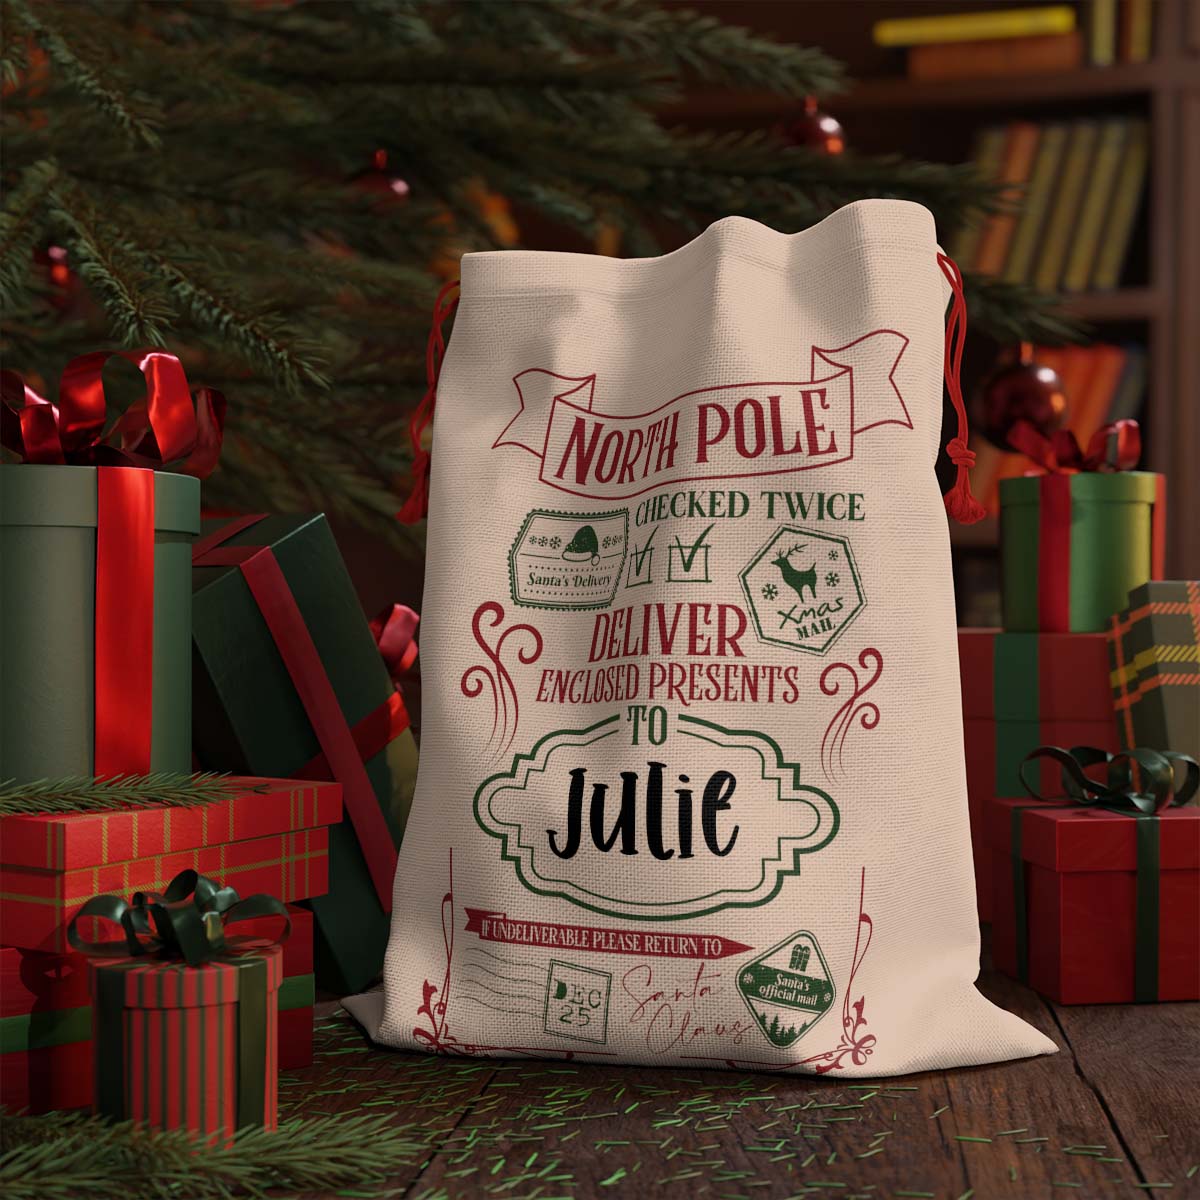 North Pole Deliver Enclosed Presents Personalized Christmas Gift Delivery SackCustomly Gifts